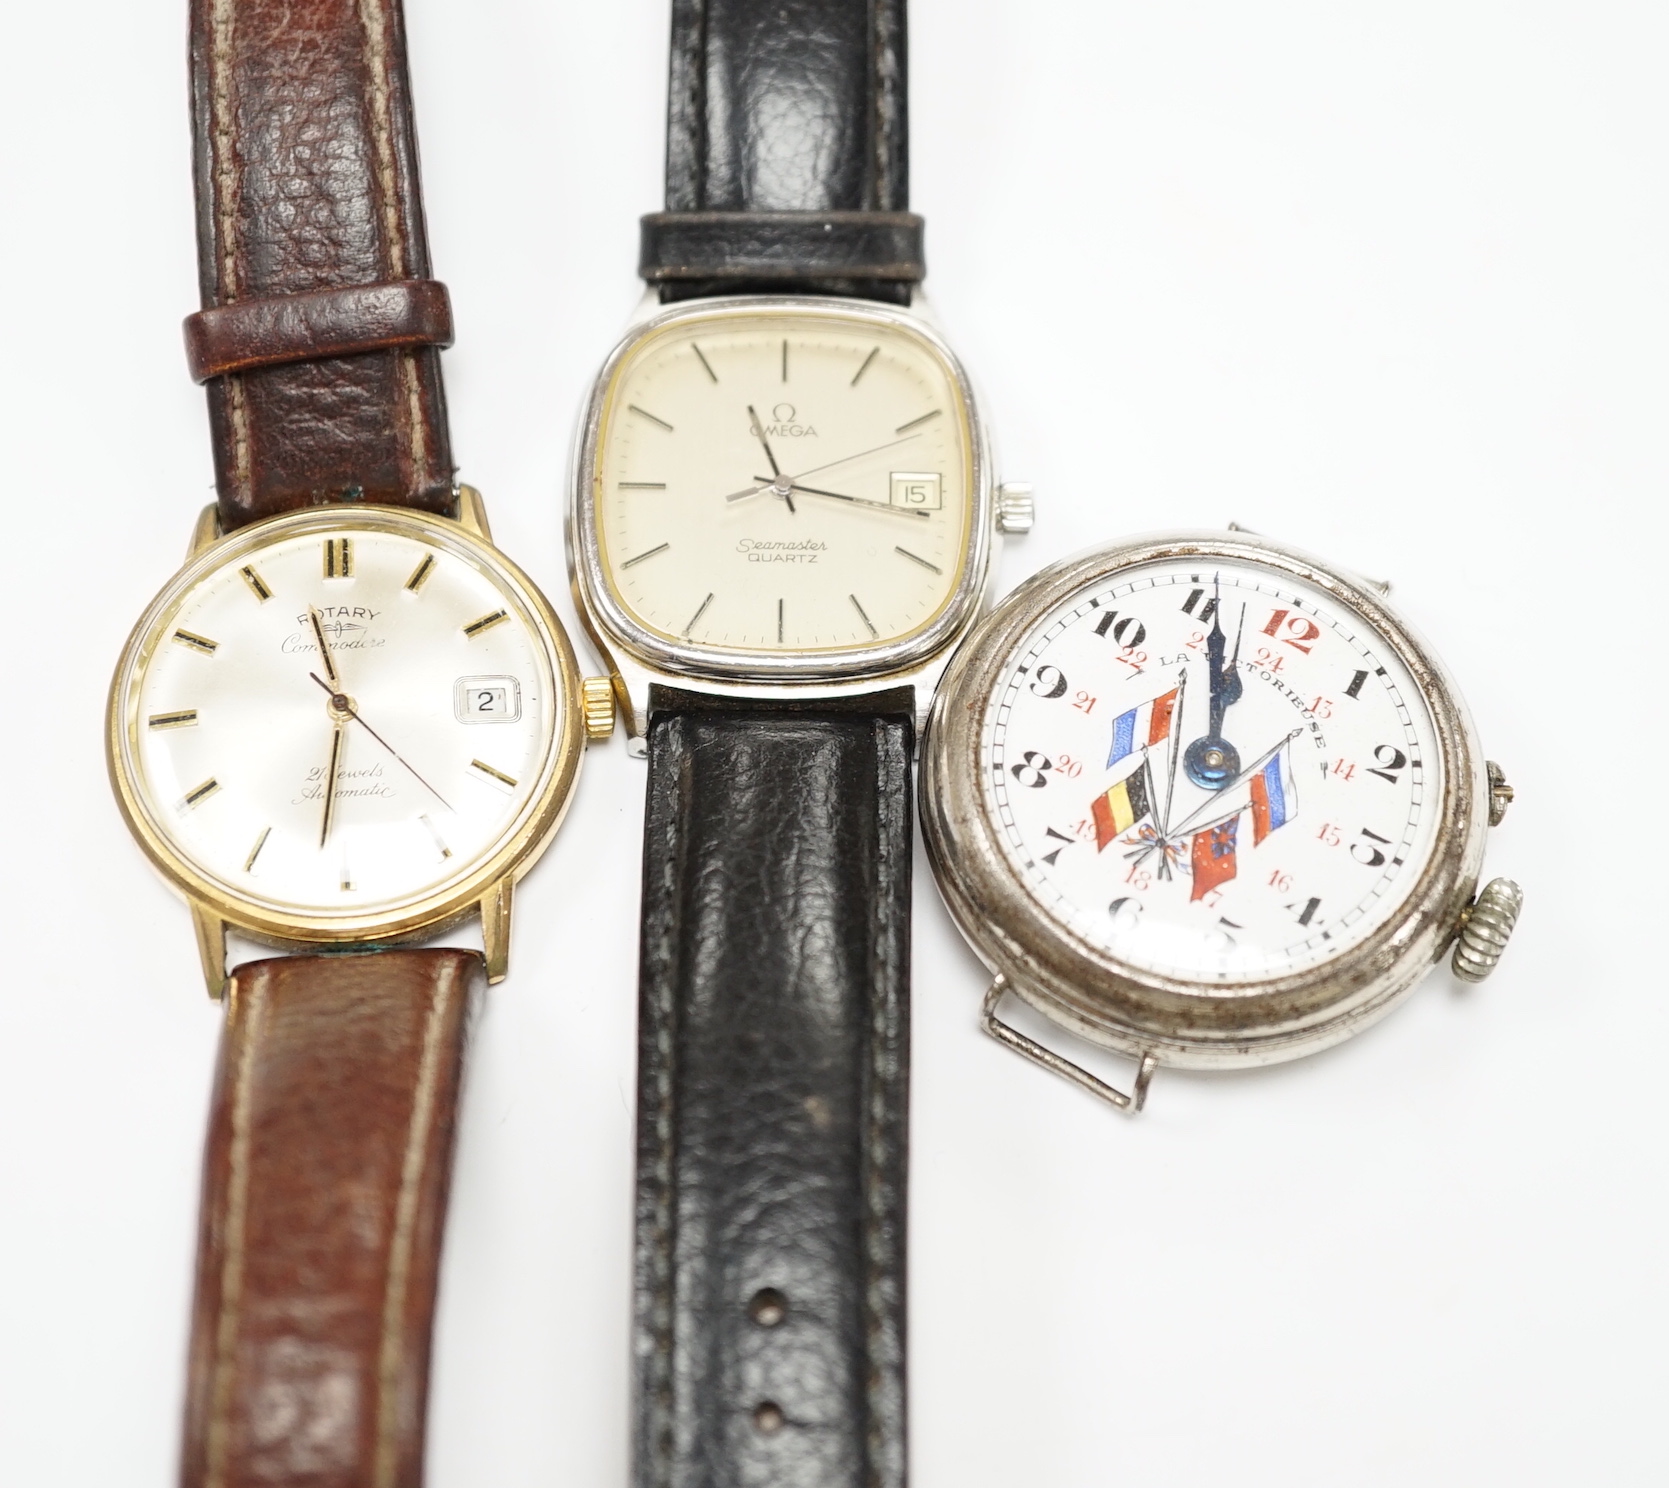 A gentleman's stainless steel Omega Seamaster quartz wrist watch, on associated leather strap, together with a gentleman's steel and gold plated Rotary Commodore automatic wrist watch and a French? wrist watch.